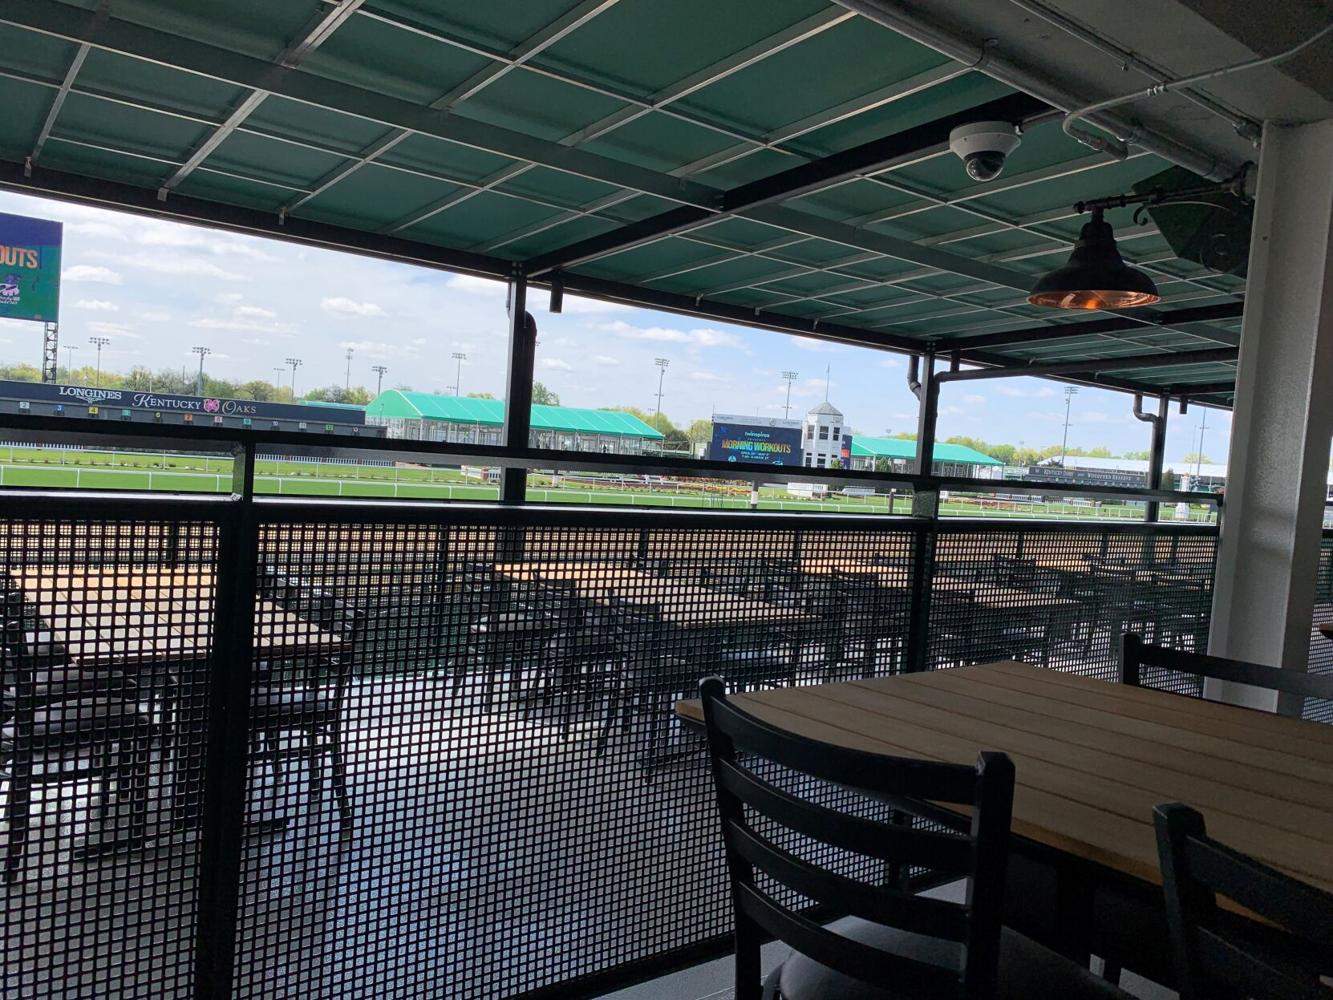 45 million Homestretch Club opens at Churchill Downs in time for